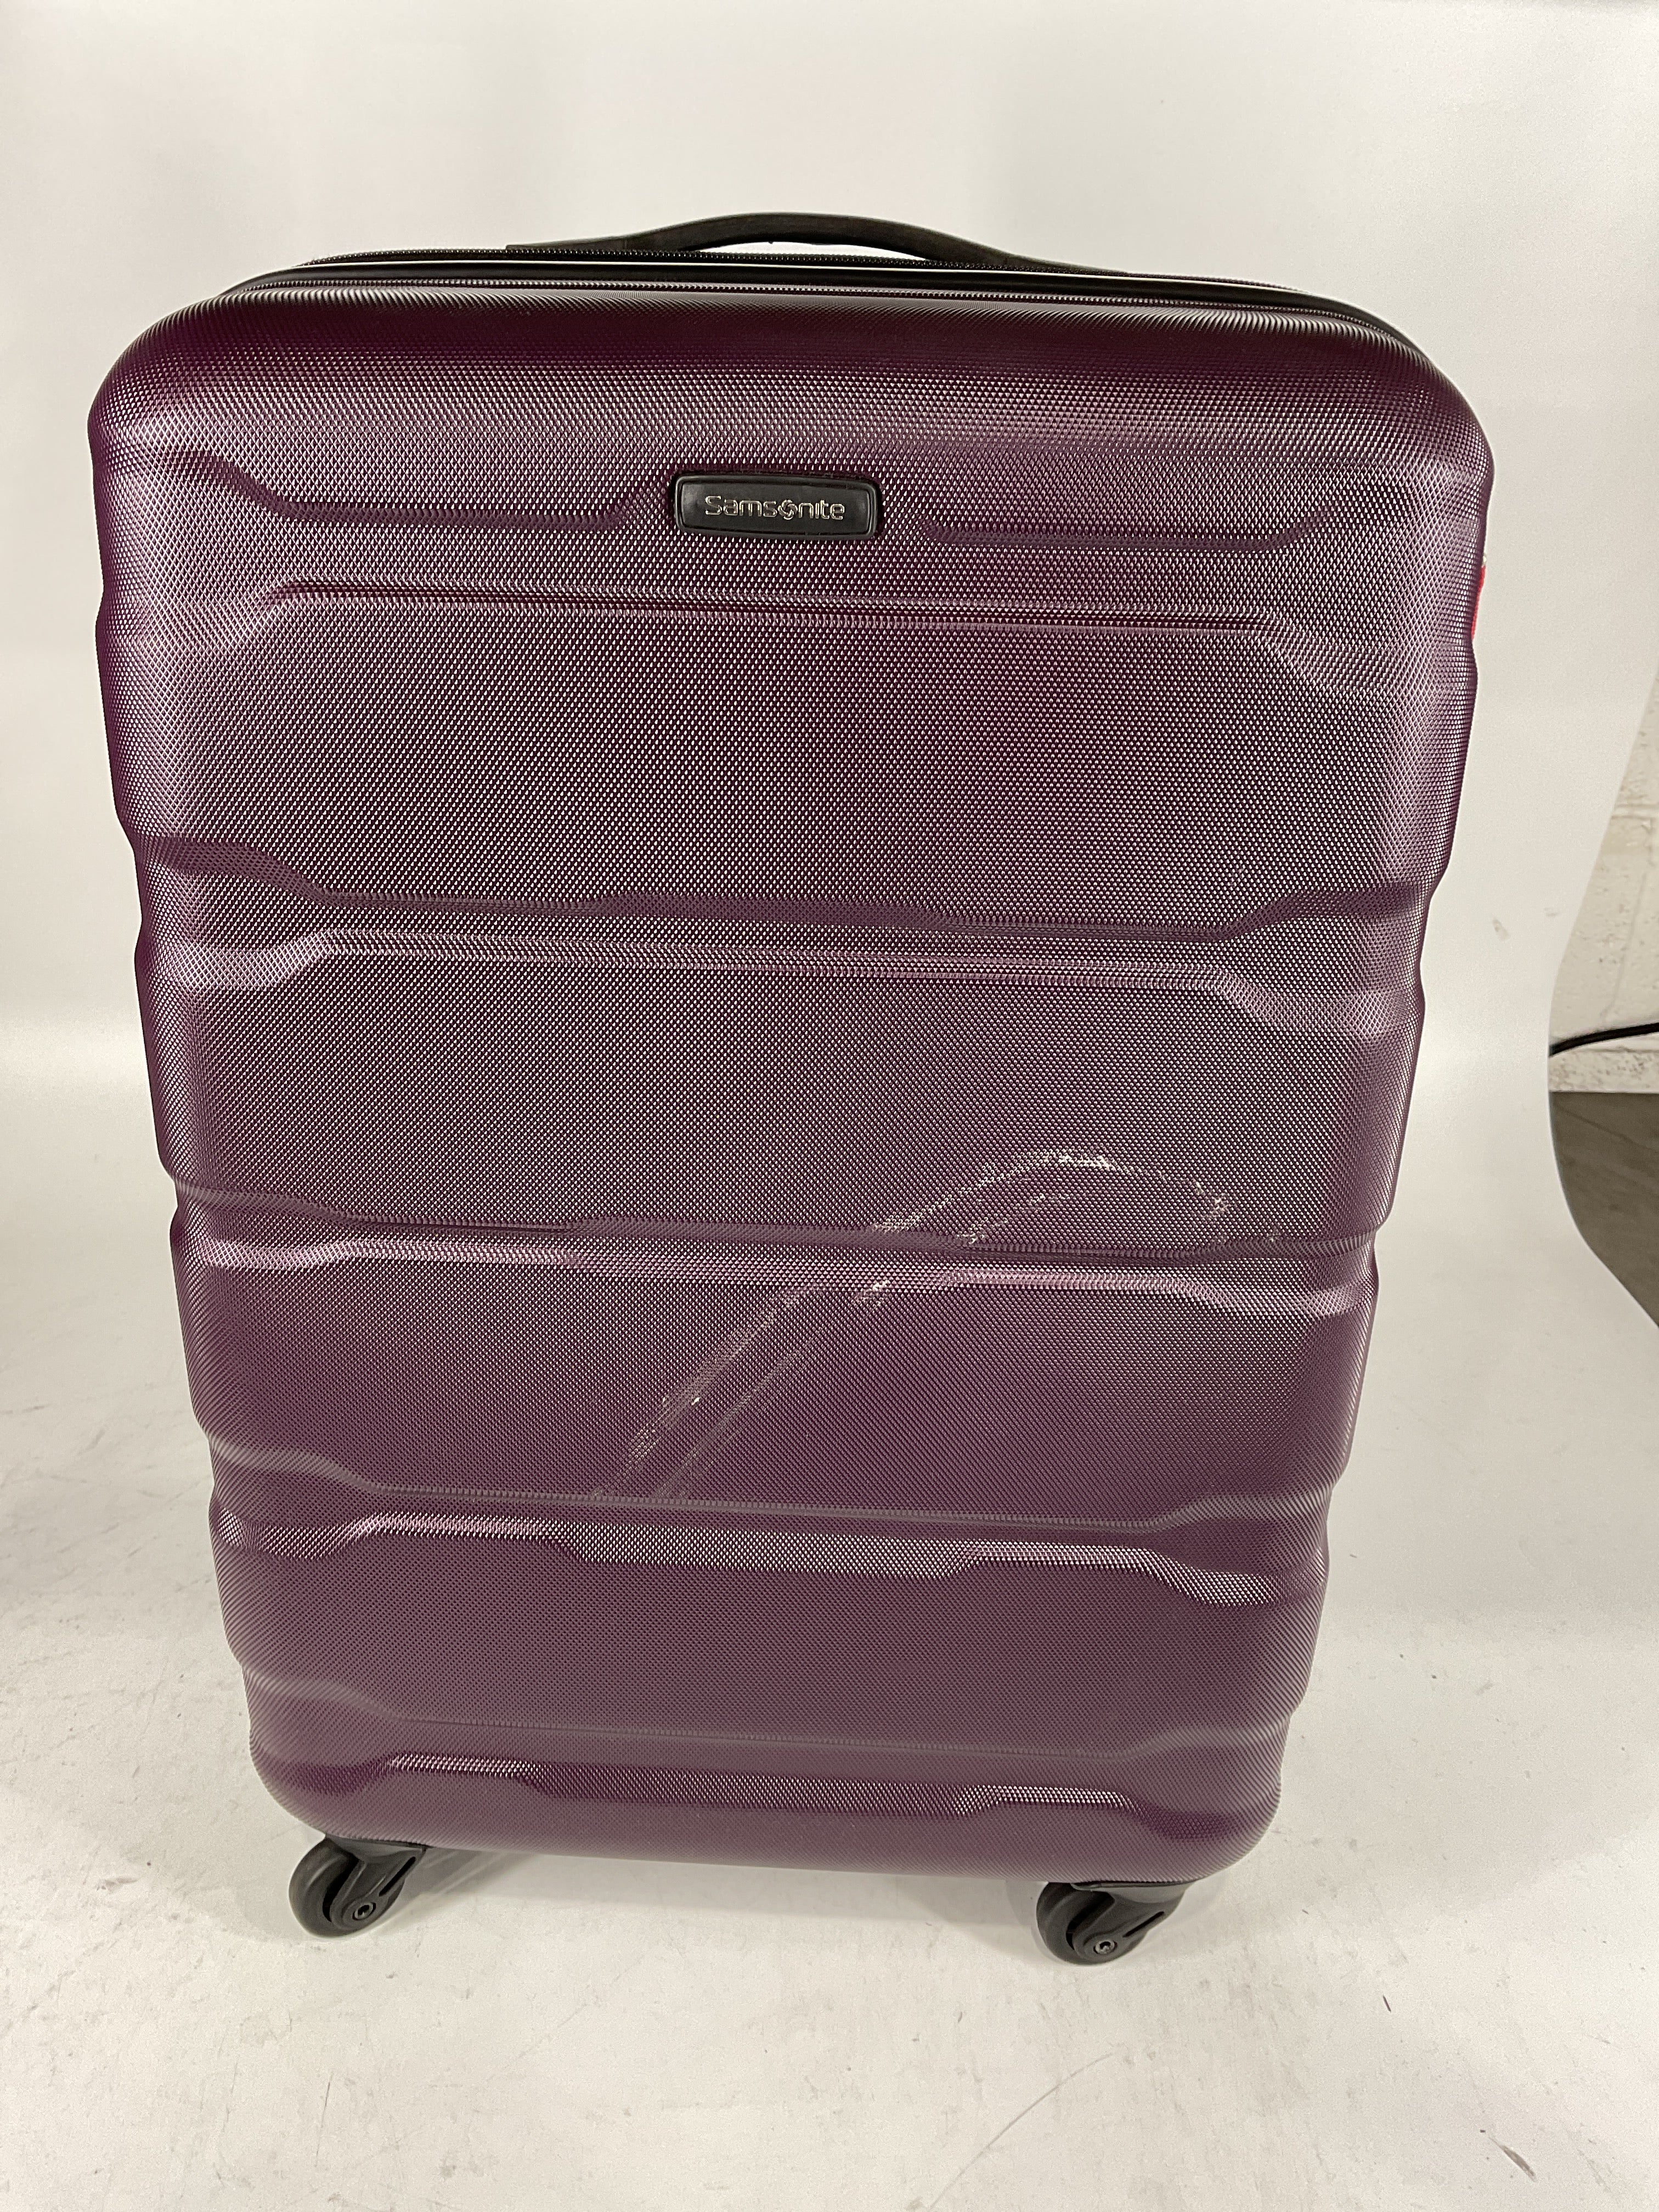 Samsonite Omni Pc Hardside Expandable Luggage with Spinner Wheels - Purple/Checked-Medium 24-Inch